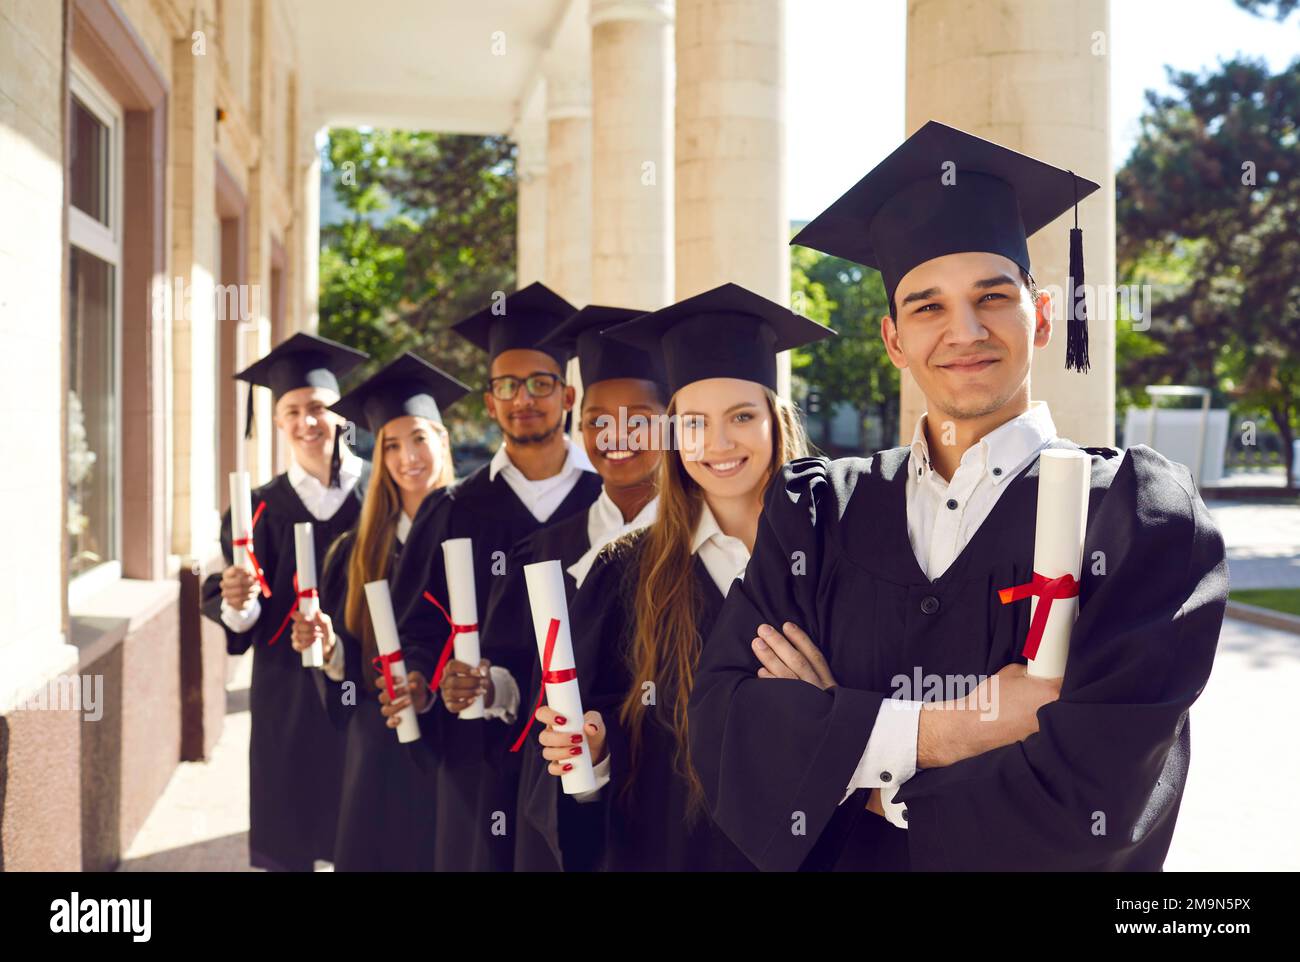 Group portrait of happy university graduates in caps and gowns holding diplomas and smiling Stock Photo